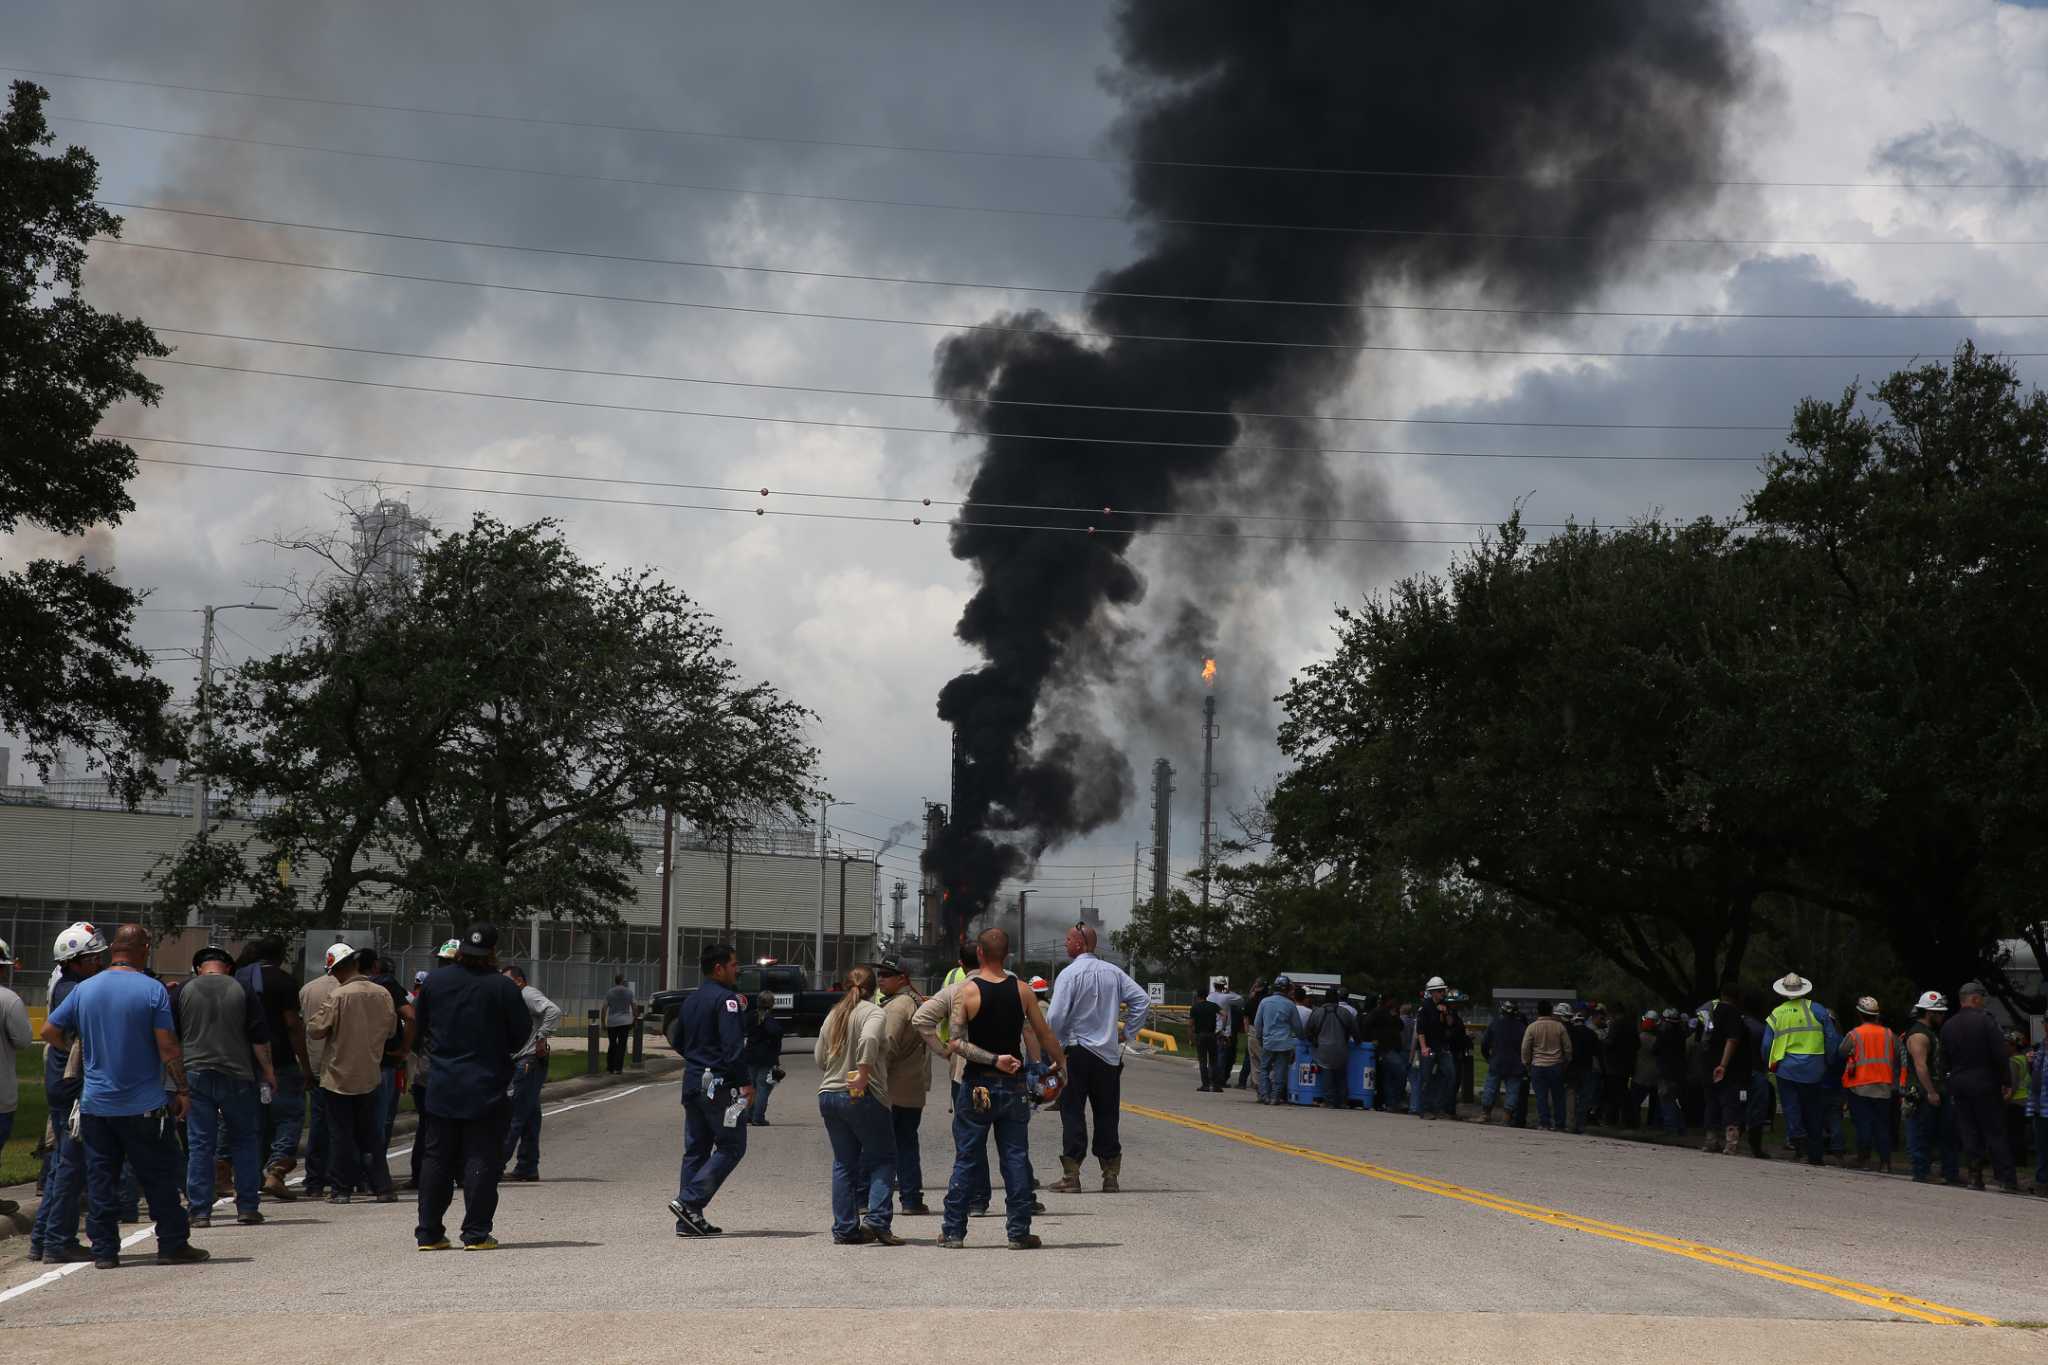 37 people injured from explosion at Exxon Mobil plant in Baytown; shelter-in-place ...2048 x 1365